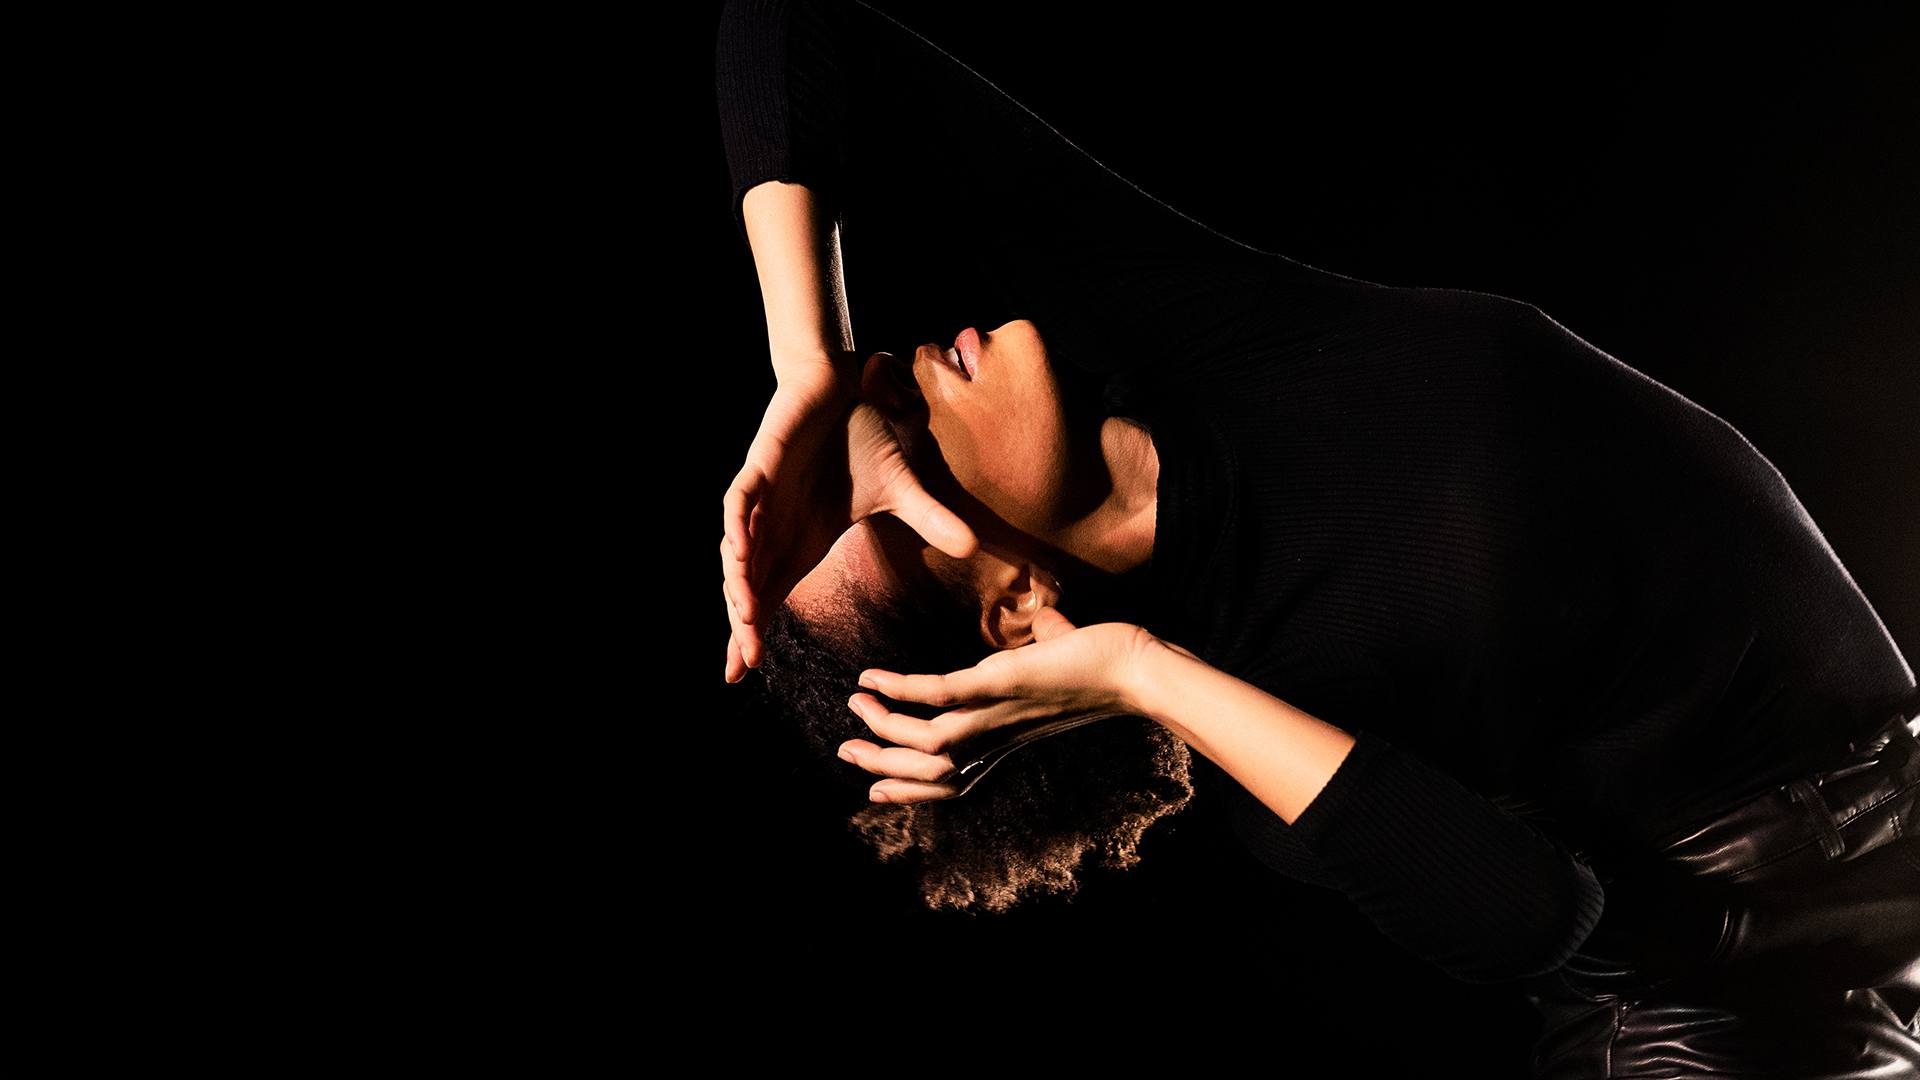 A black female dancer dressed all in black leans back with her hands grasping something imaginary